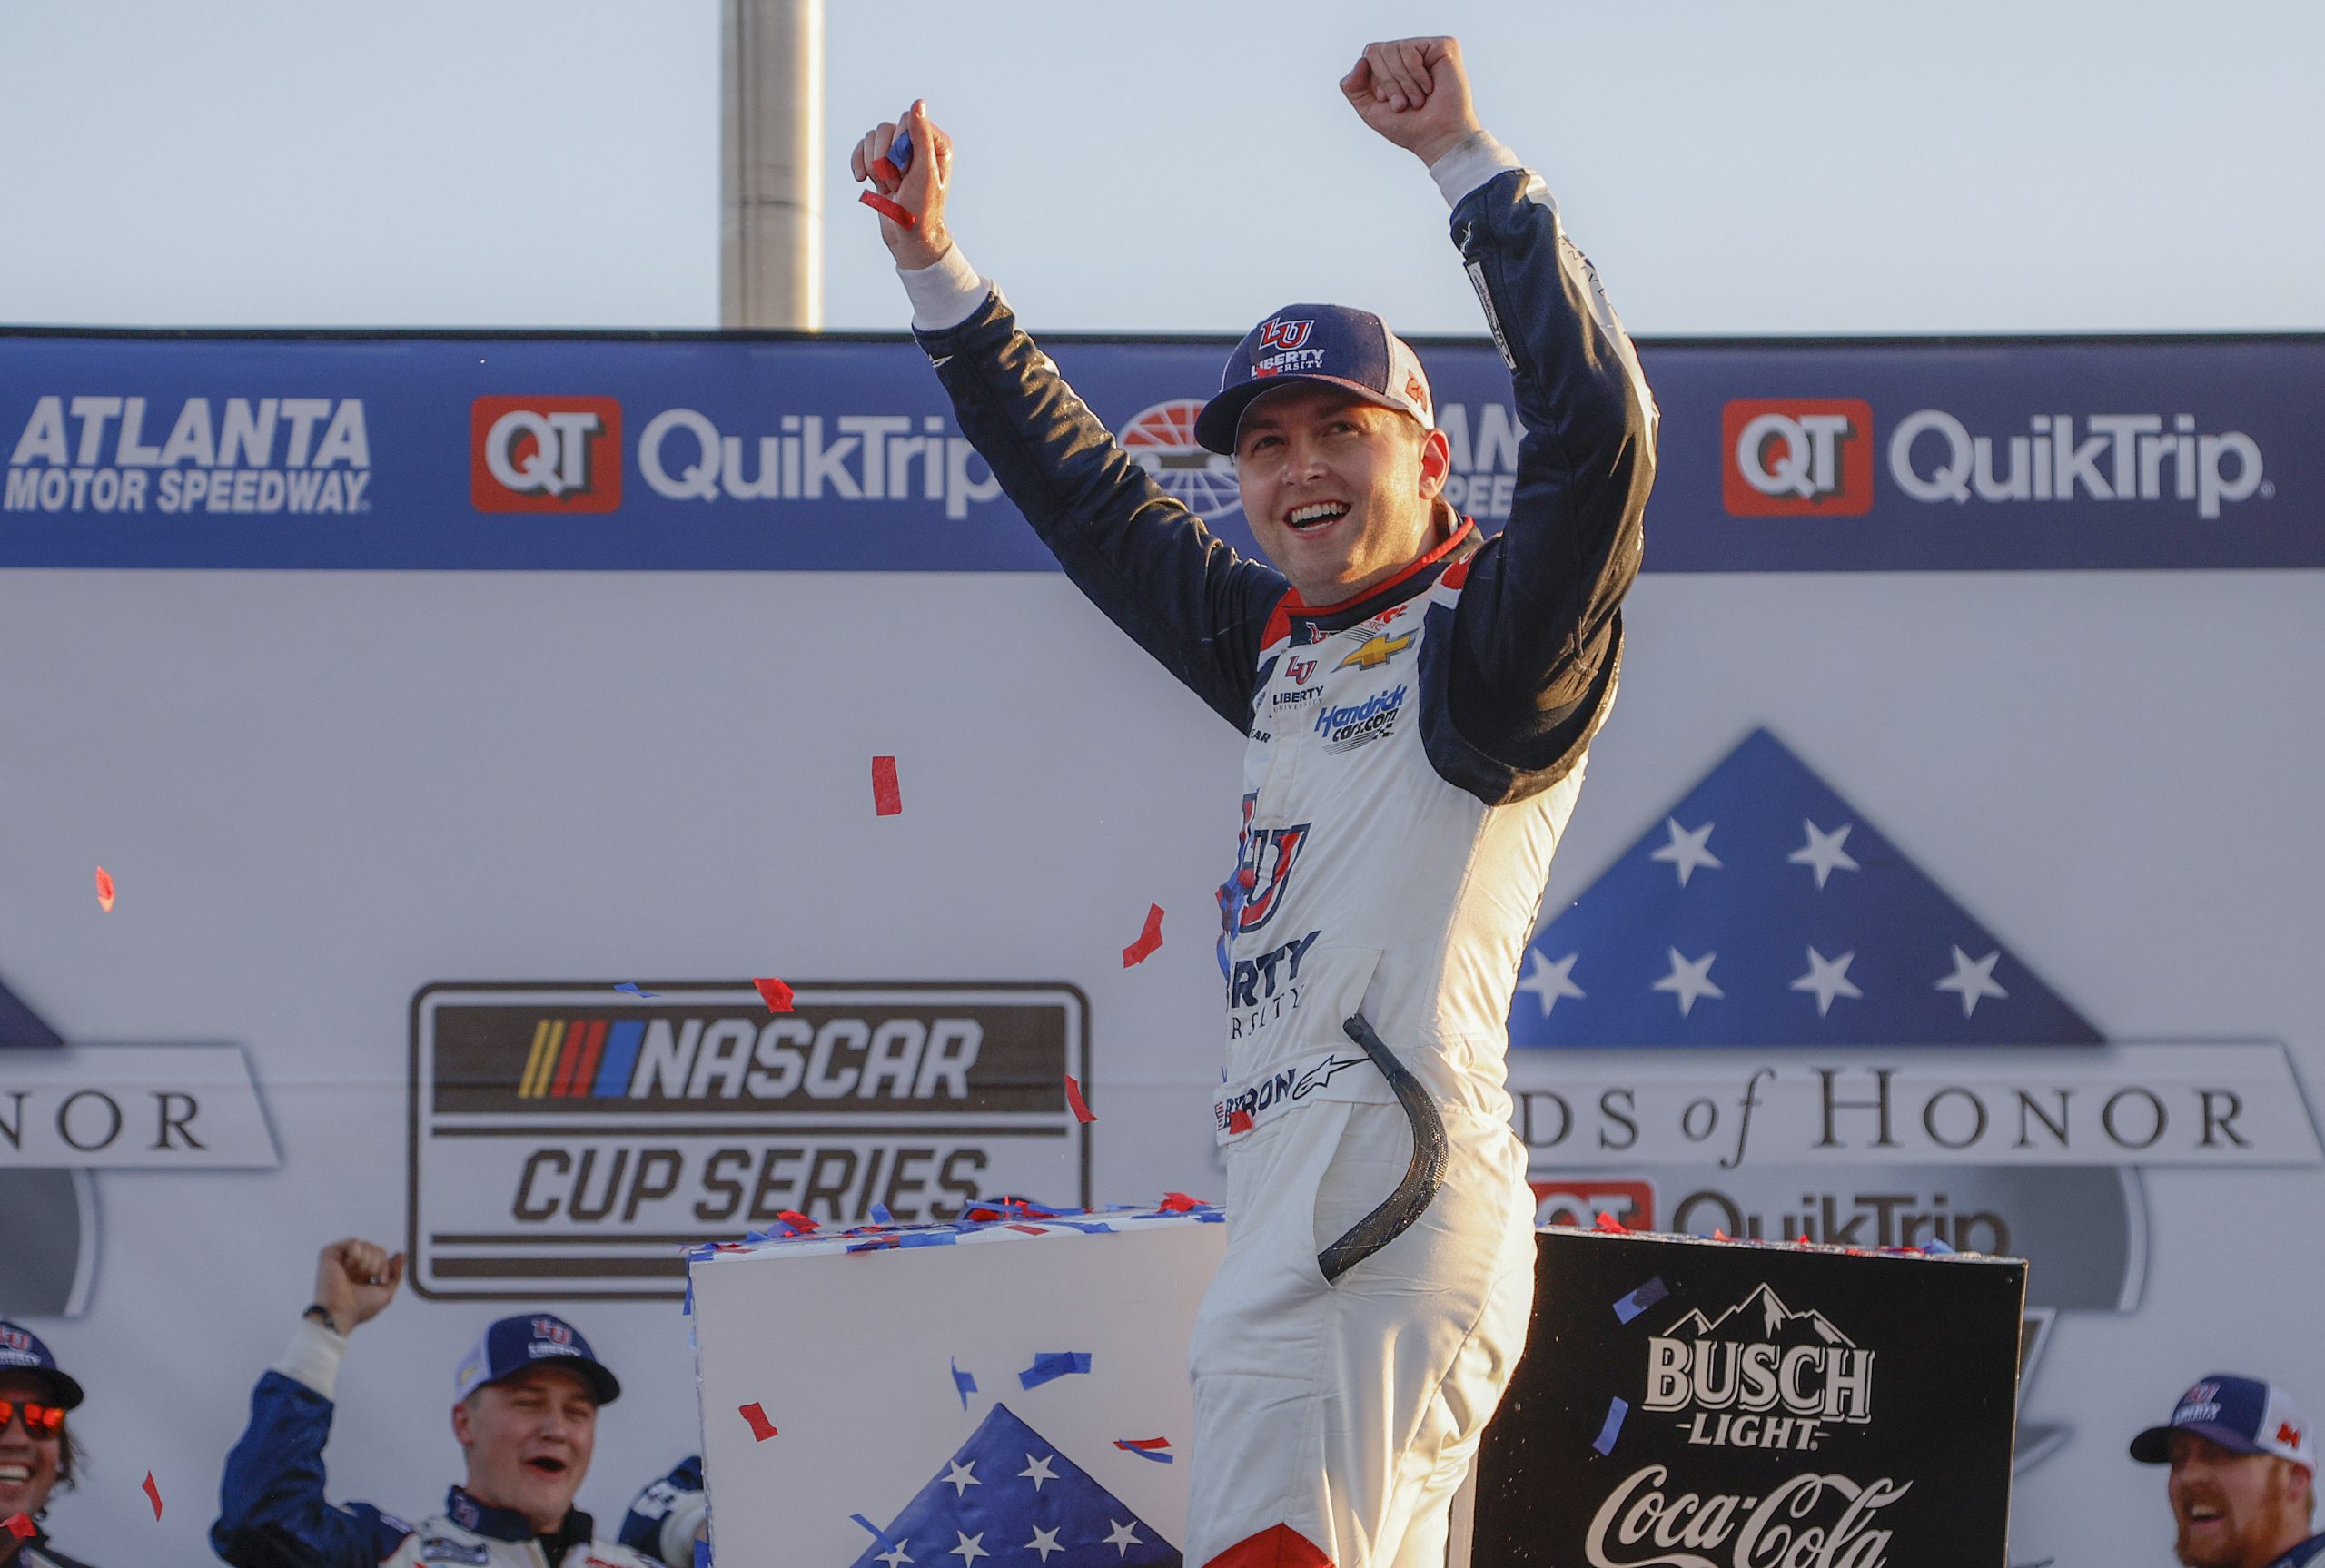 William Byron, driver of the No. 24 Chevrolet, celebrates after winning the NASCAR Cup Series Folds of Honor QuikTrip 500 at Atlanta Motor Speedway on March 20, 2022.